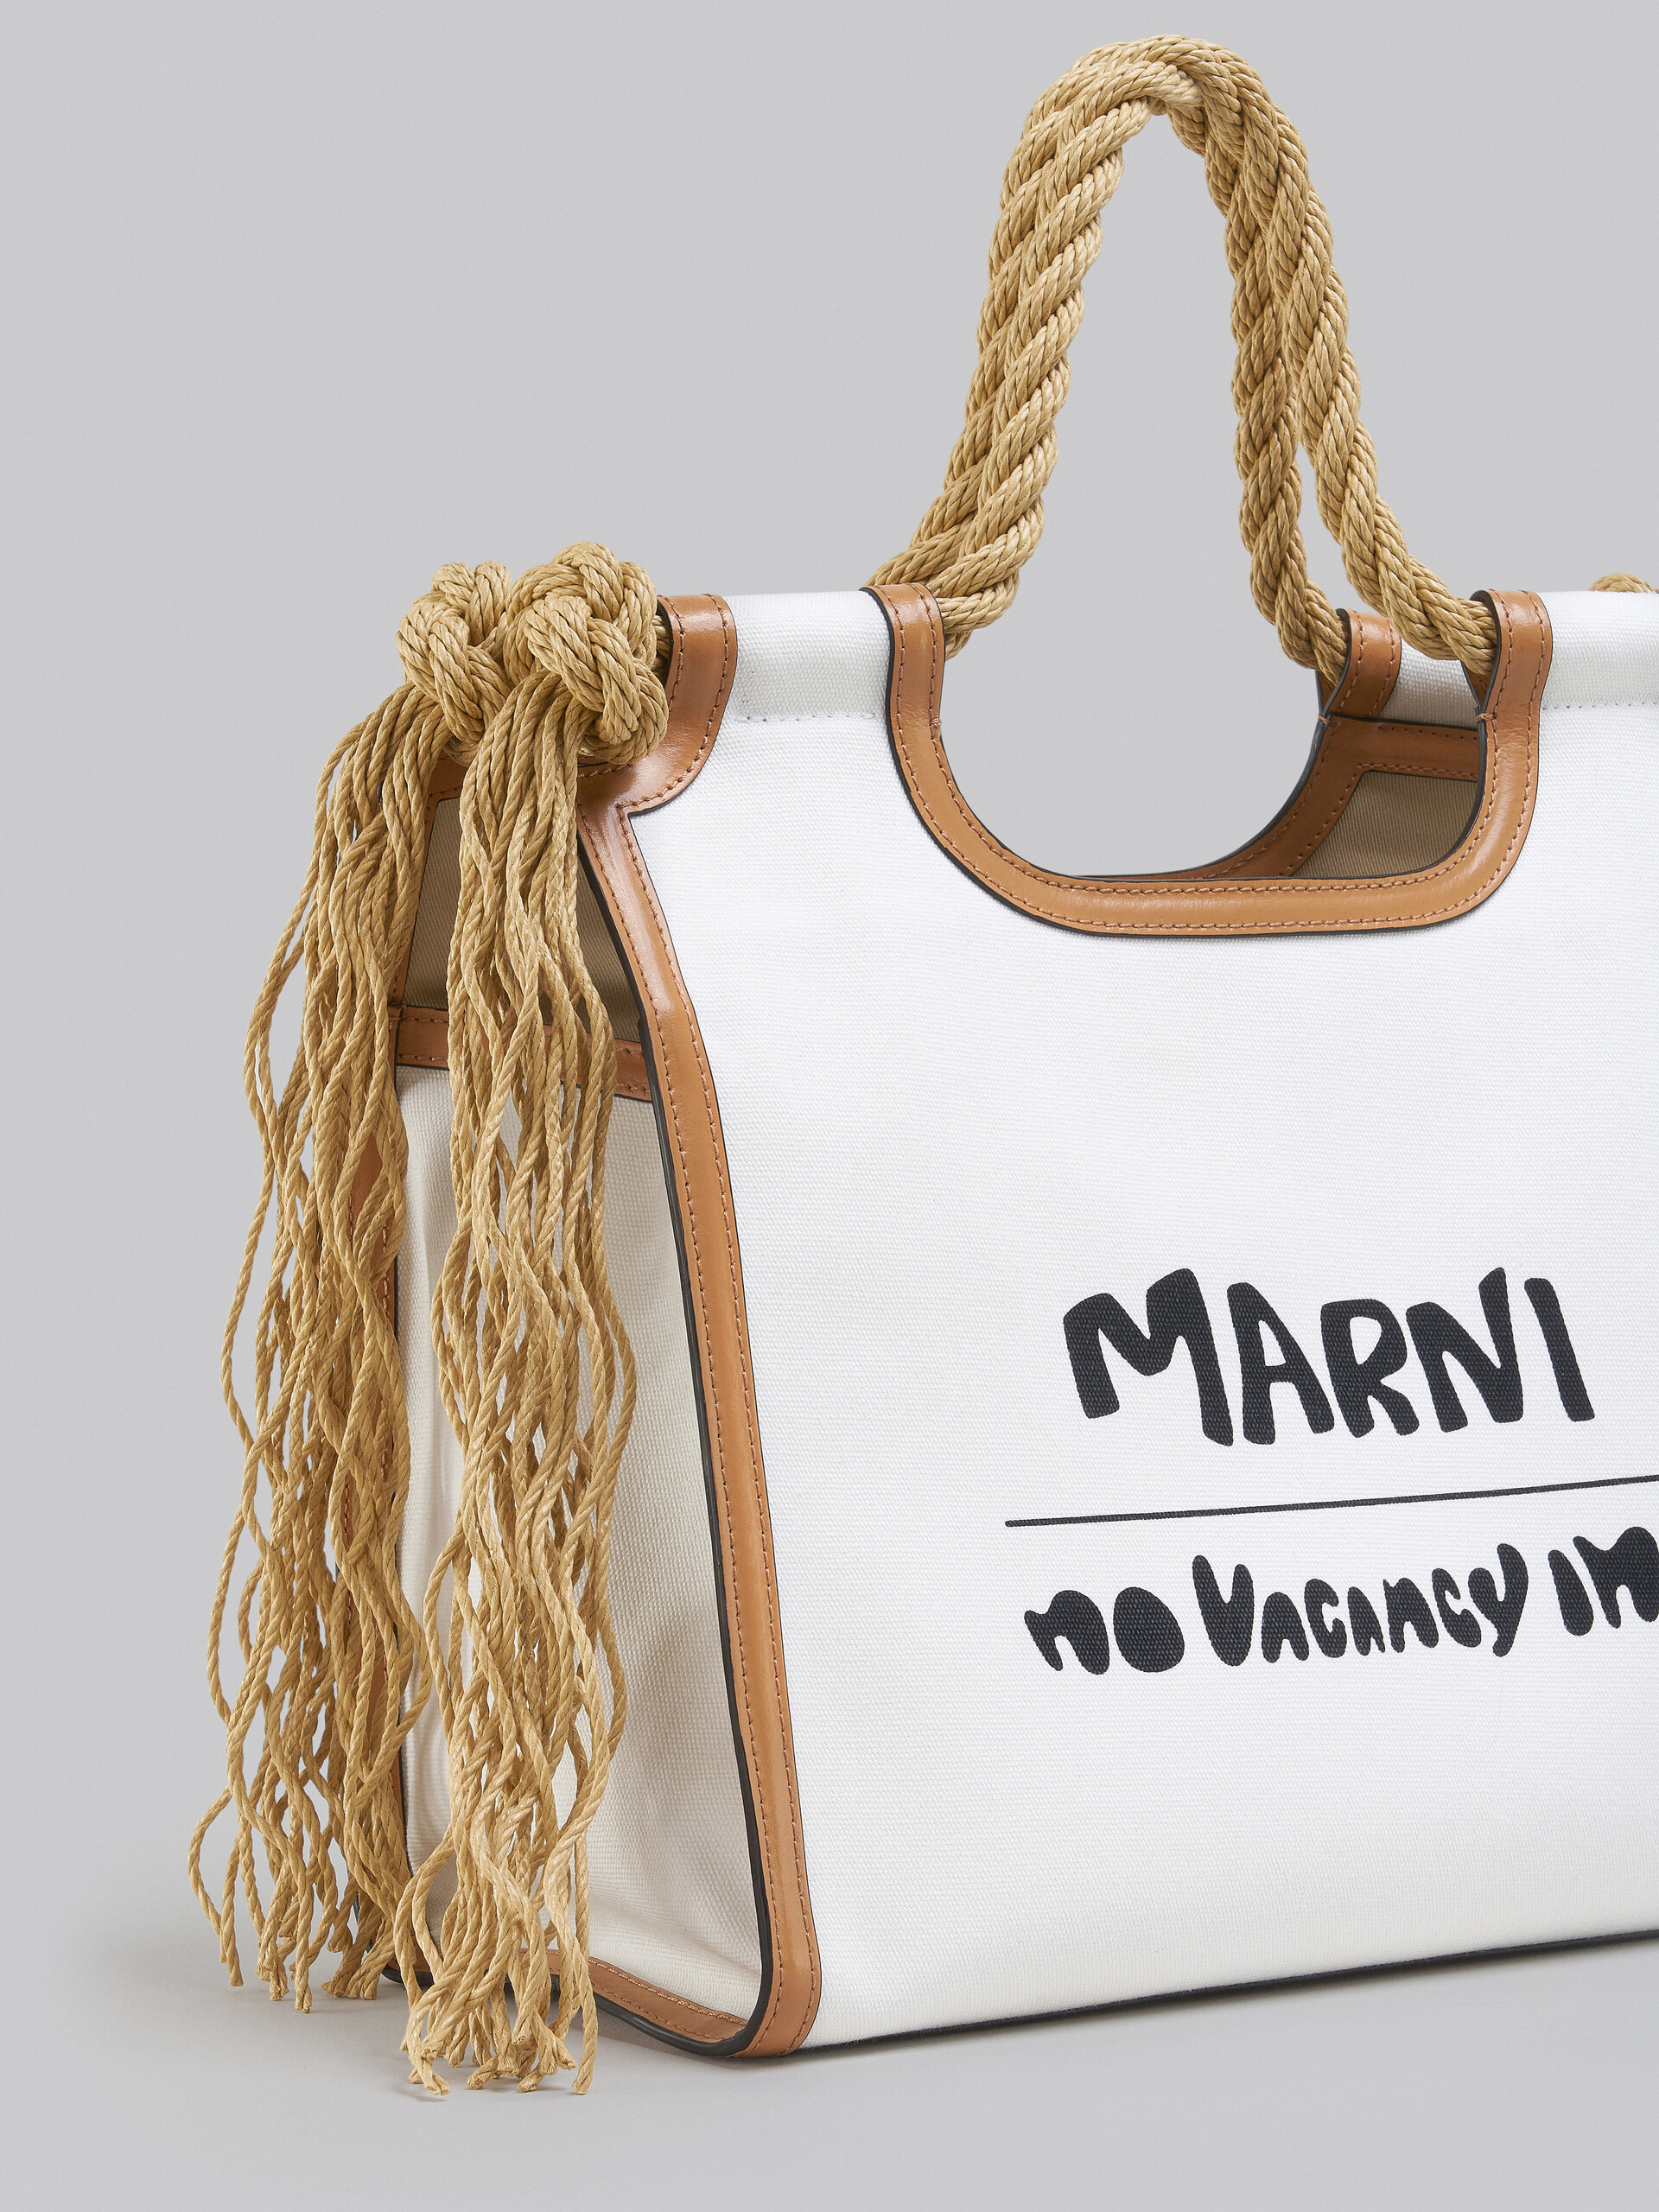 Marni x No Vacancy Inn - Marcel Tote Bag in white canvas with beige trims - Handbag - Image 5